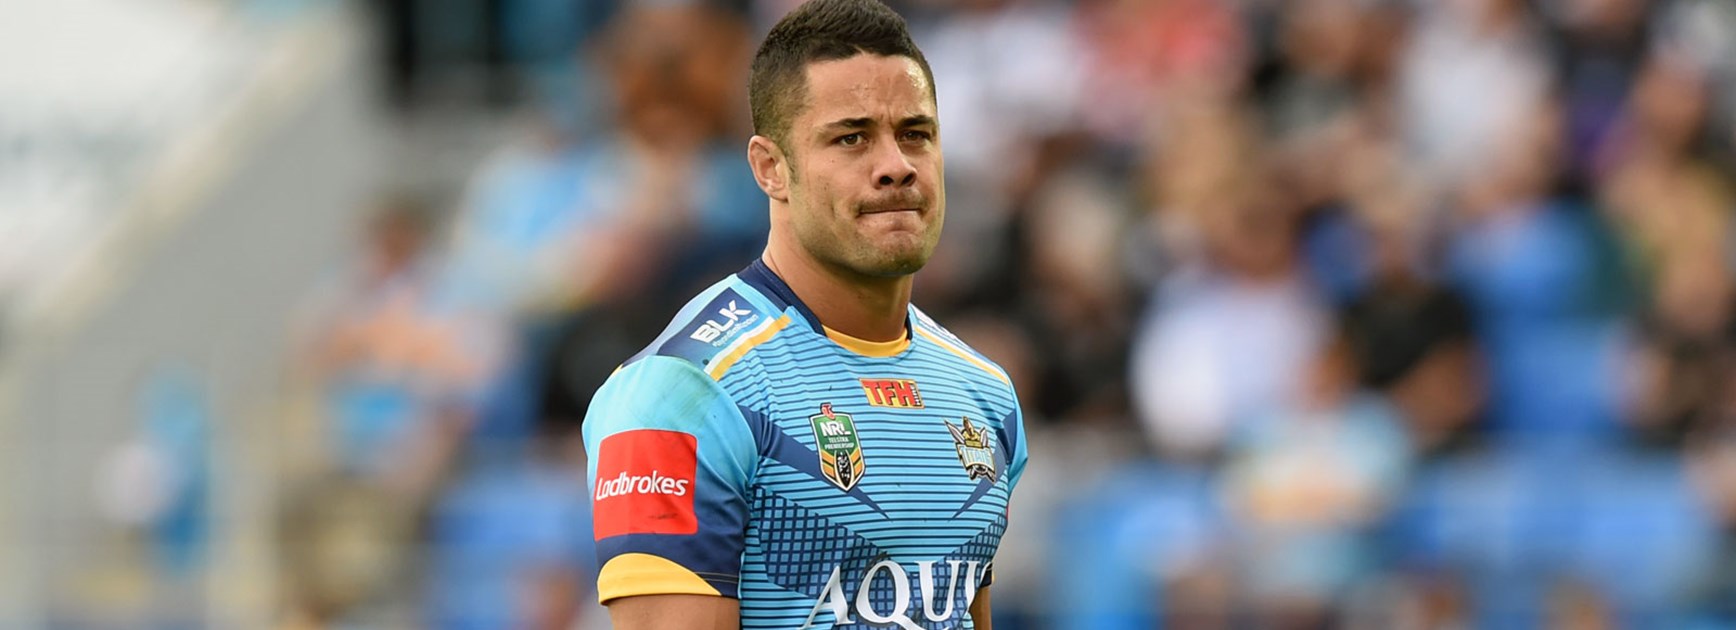 Titans staff hope Jarryd Hayne will be able to play the full 80 minutes in the coming weeks.